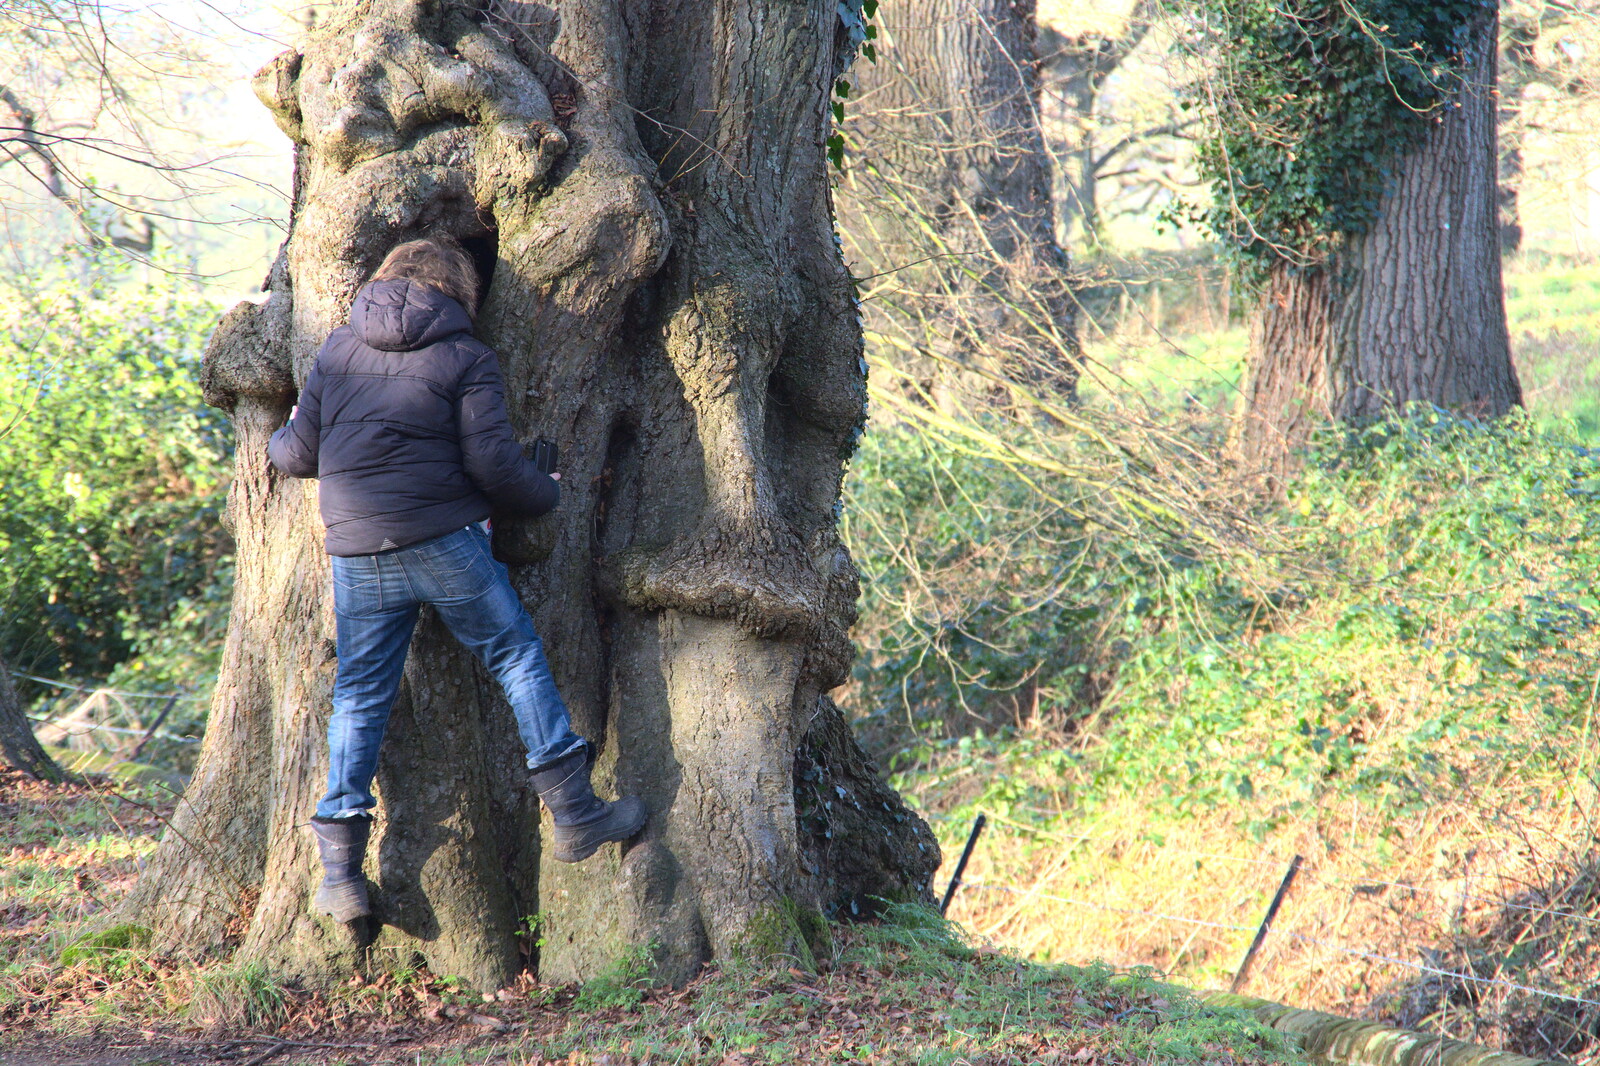 Fred peers into a hollow tree trunk from A Visit to Blickling Hall, Aylsham, Norfolk - 9th January 2022